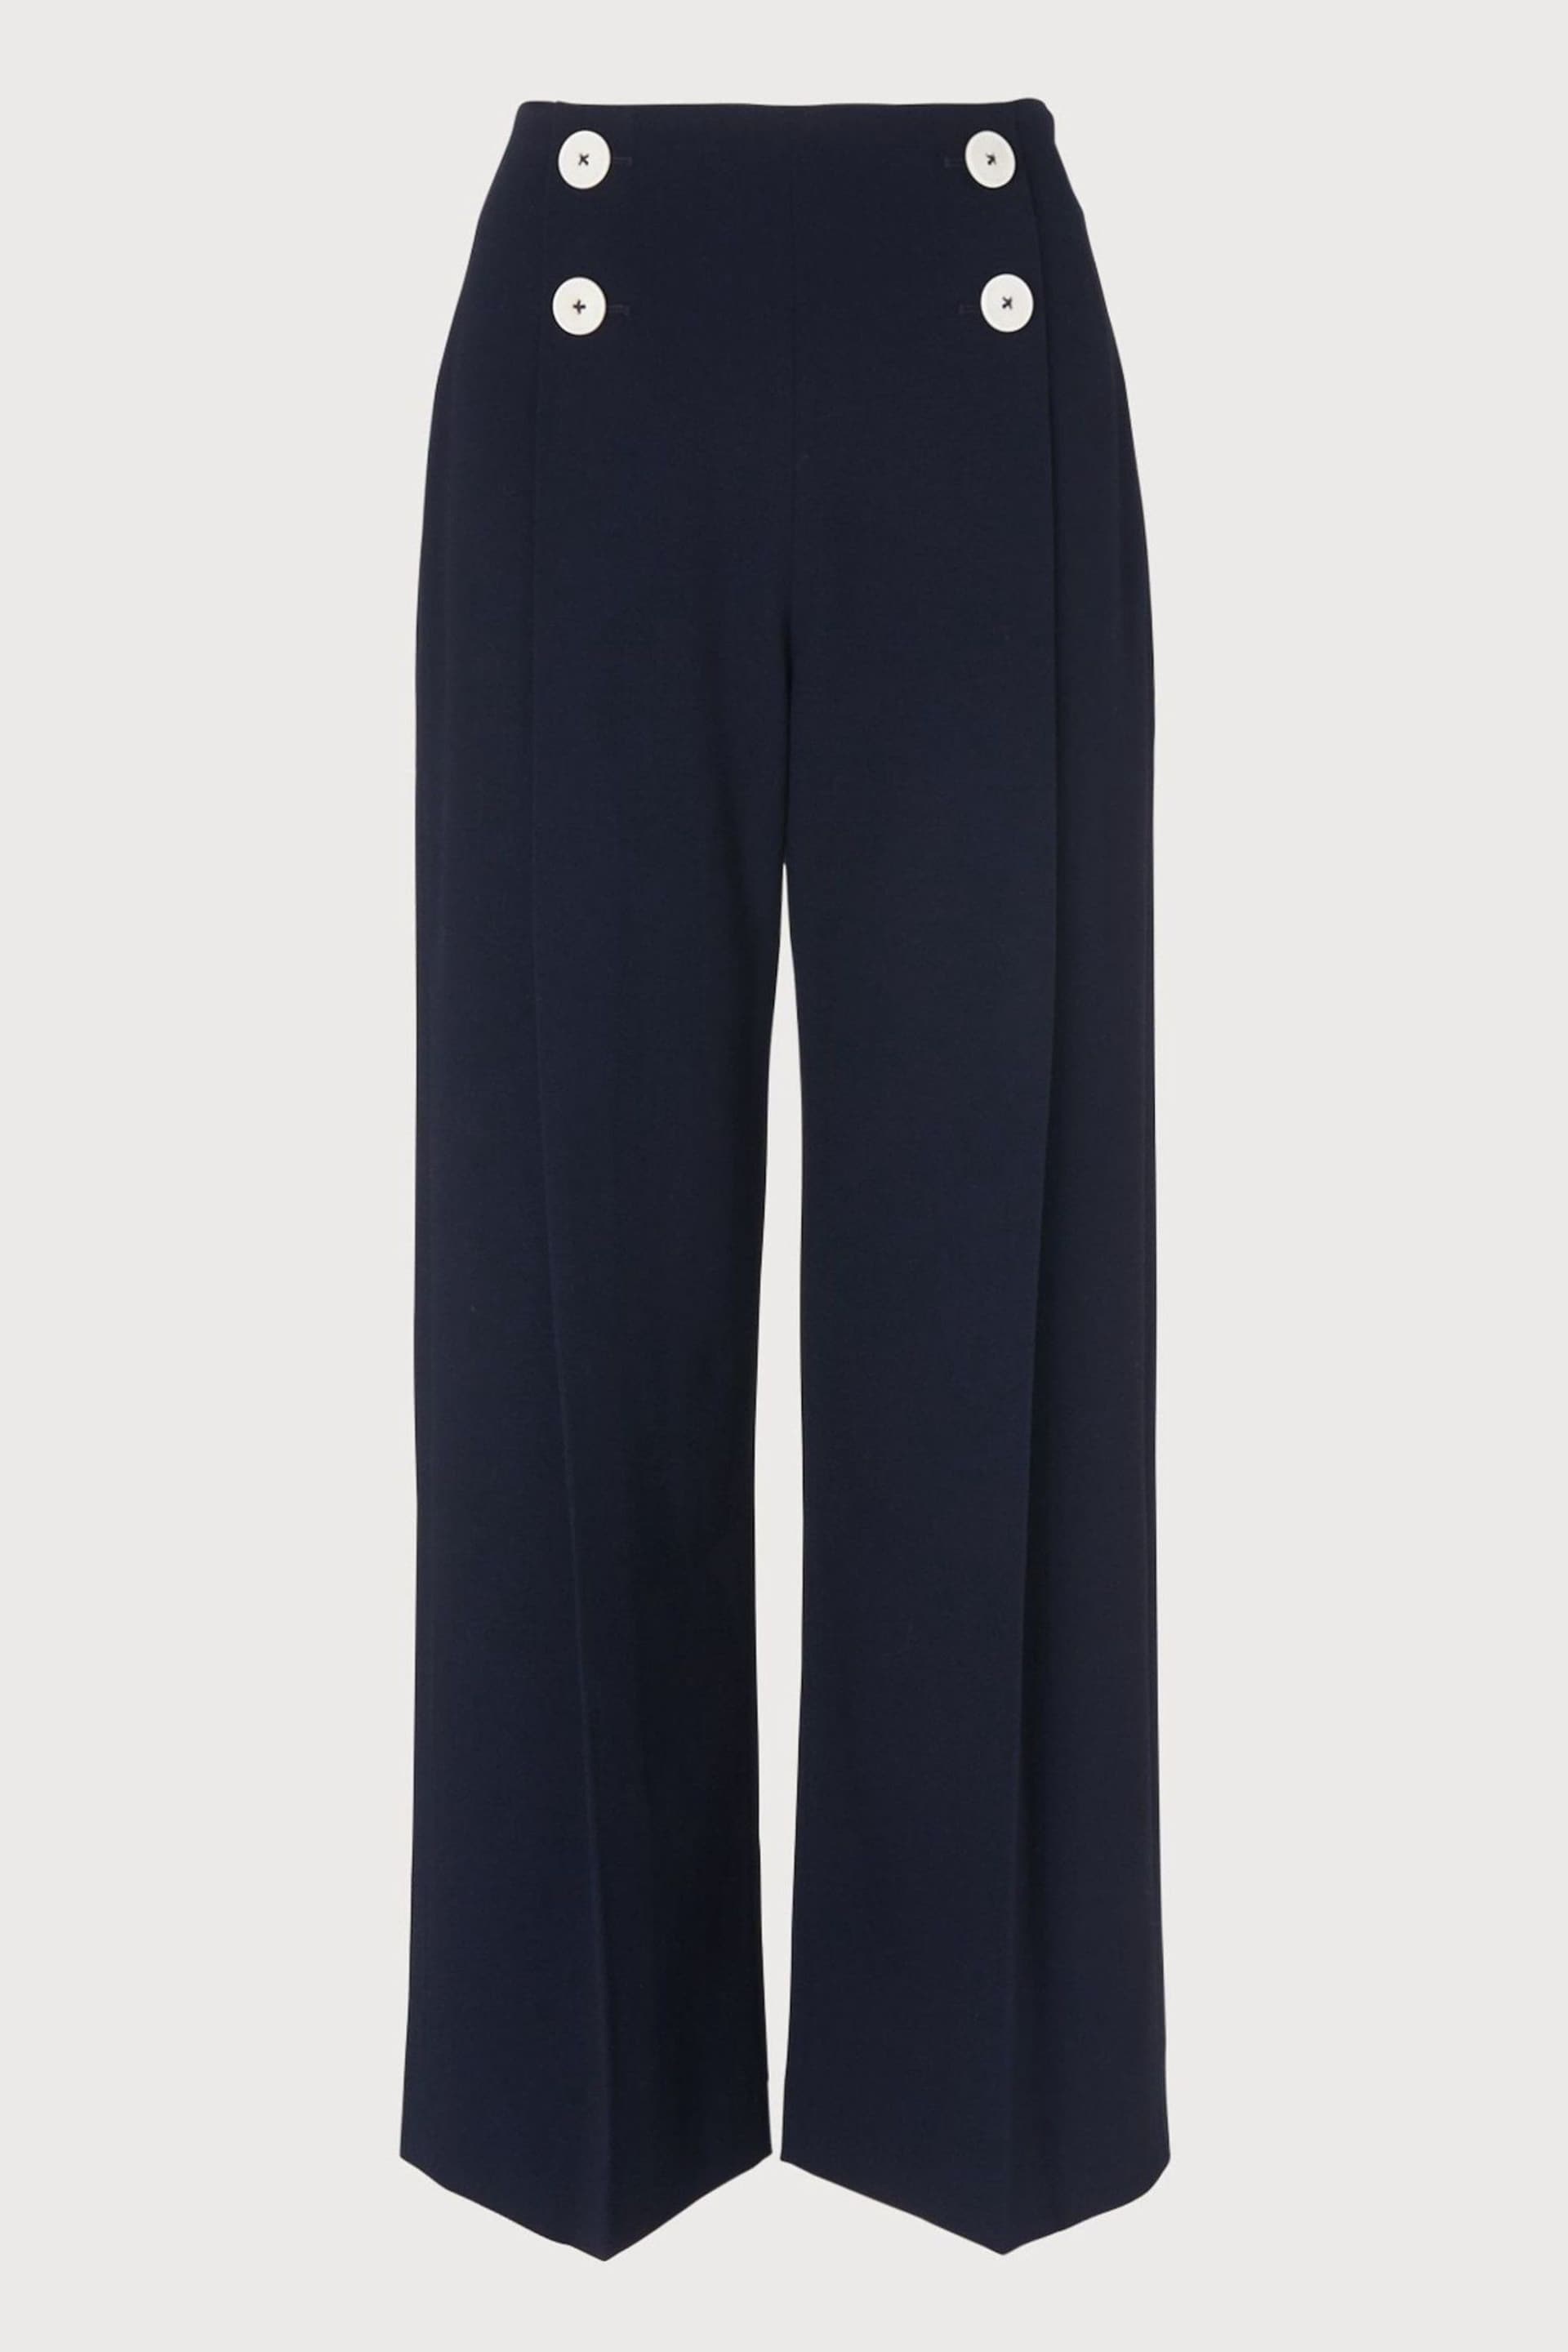 LK Bennett Parker Button Front Trousers - Image 4 of 4